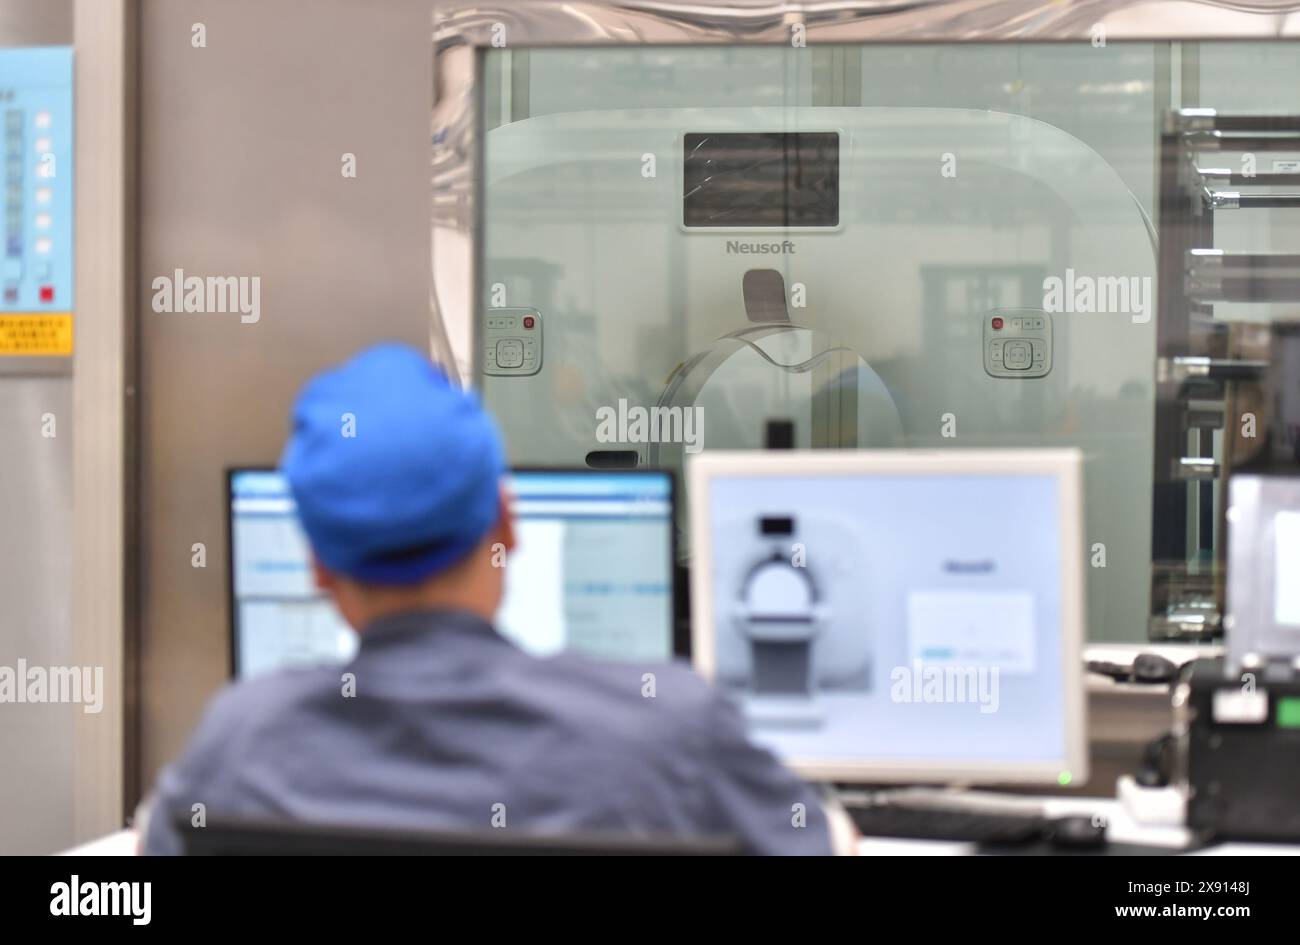 (240528) -- SHENYANG, May 28, 2024 (Xinhua) -- A worker checks a CT machine at Neusoft Medical in Shenyang, northeast China's Liaoning Province, May 22, 2024. In recent years, Shenyang has created an environment to better develop biomedicine and medical equipment industries, laying a foundation to form medical industrial clusters.    In 2023, Shenyang's biomedical and medical equipment industry achieved a total industrial output value of 28.16 billion yuan (about 3.89 billion U.S. dollars) with a year-on-year increase of 5.4%. And three national technology centers have been cultivated.     In Stock Photo